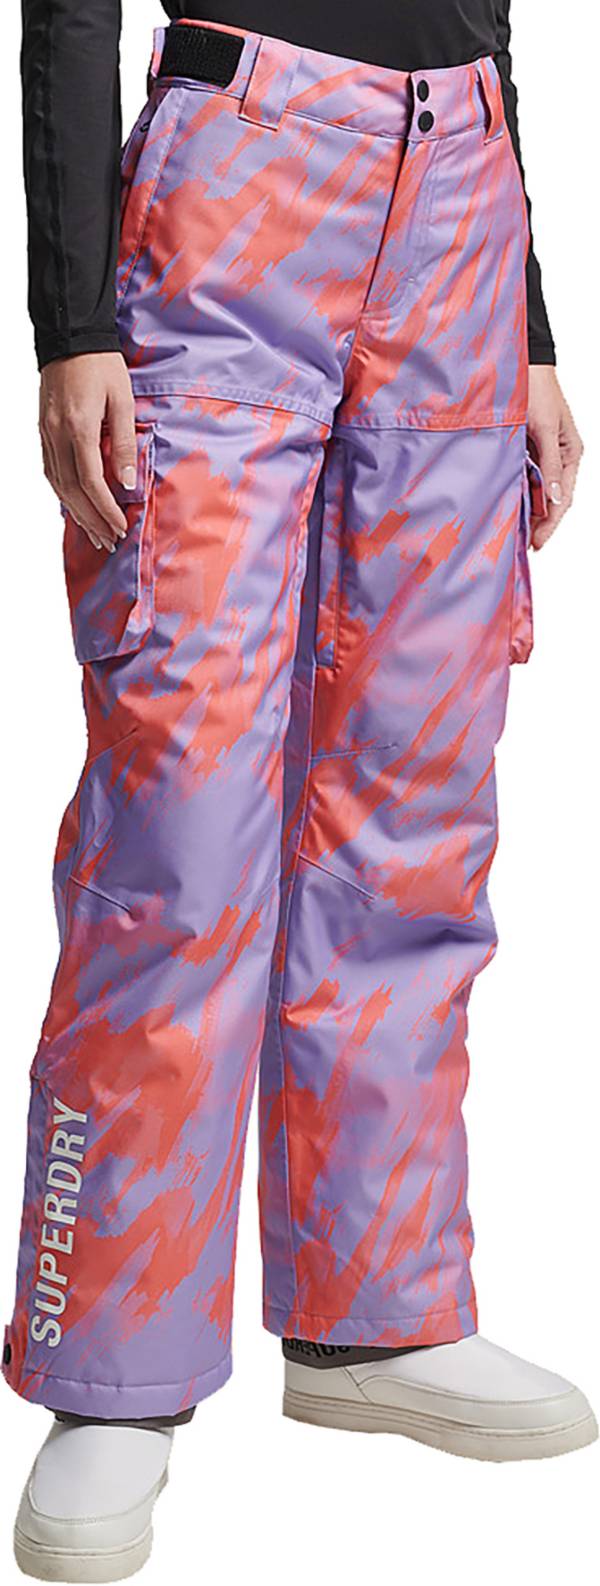 Superdry Women's Rescue Ski Pants product image